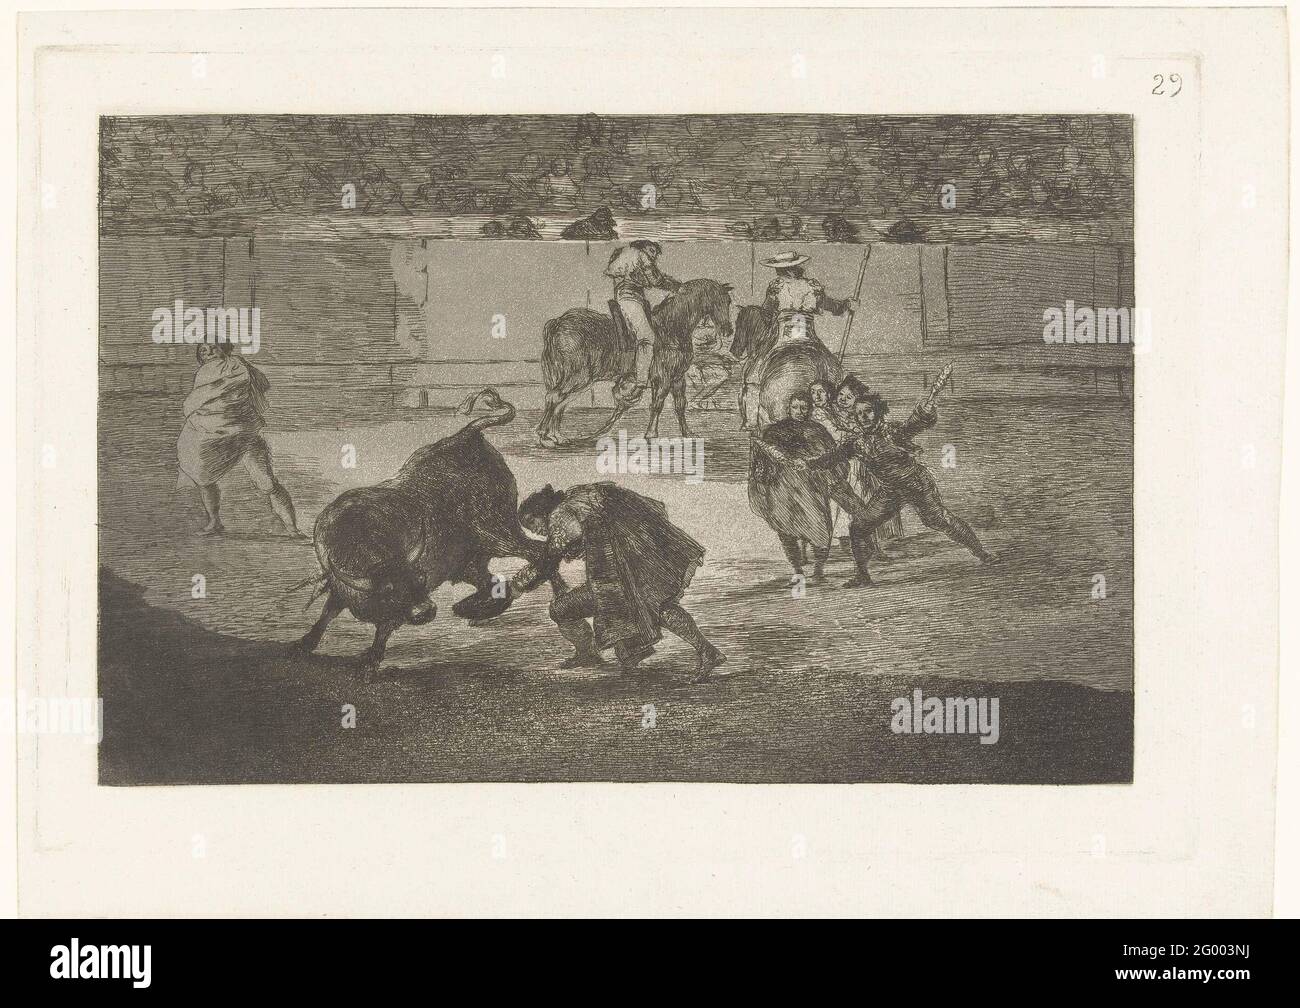 Pepe-Hillo takes his hat for the bull; Pepe Illo Haciendo El Recort Al Toro; La Tauromaquia; Bullfighting. The arena with two picadors and a number of men on foot. In the foreground the Torero (bullfighter) Pepe-Hillo who decreases his hat before the bull. Stock Photo